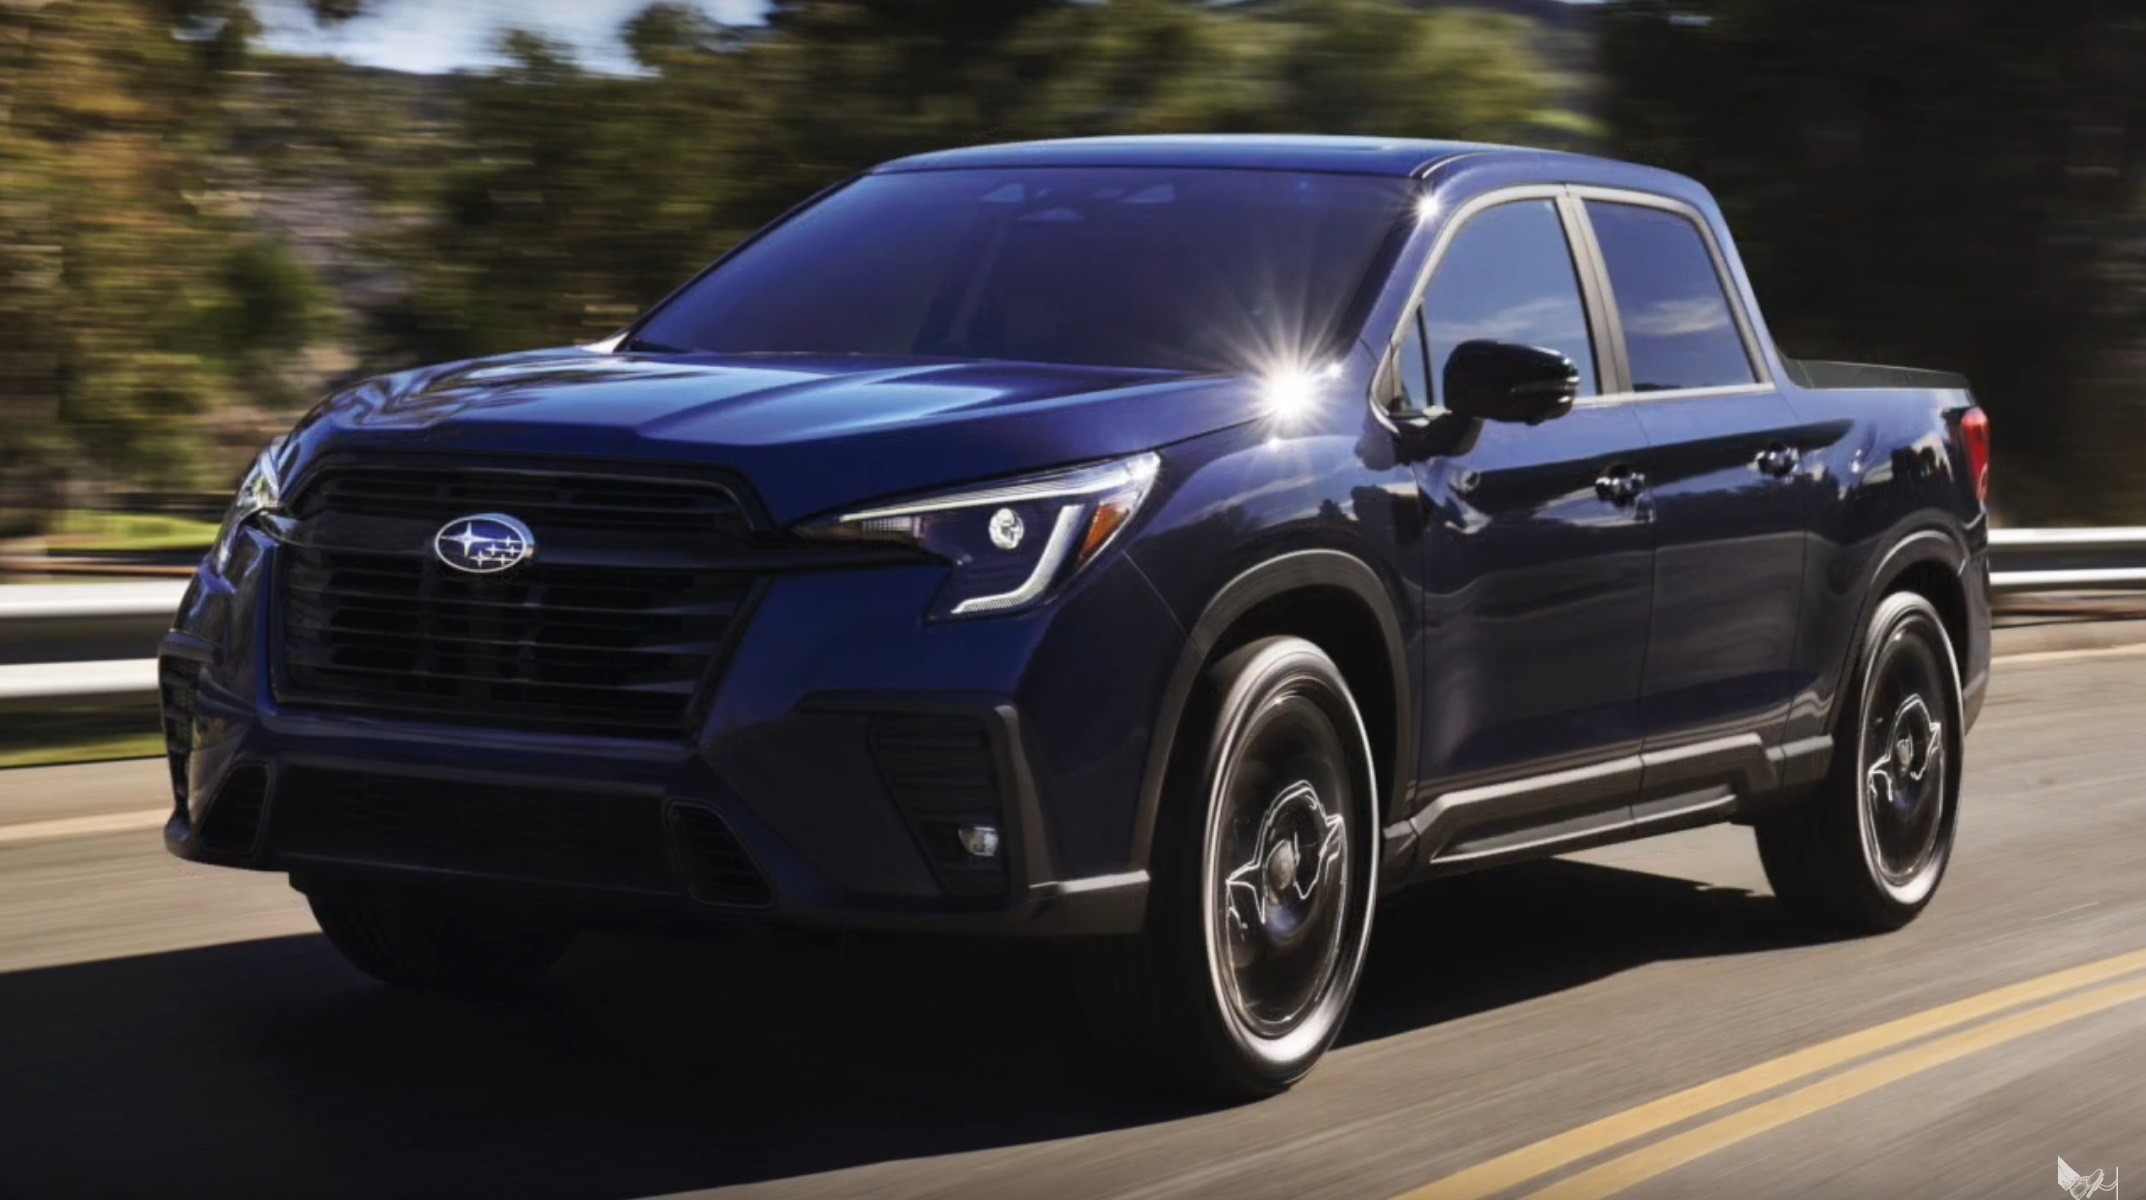 2023 Subaru Ascent Gets Turned Into a Pickup, Do You Like It Better Now